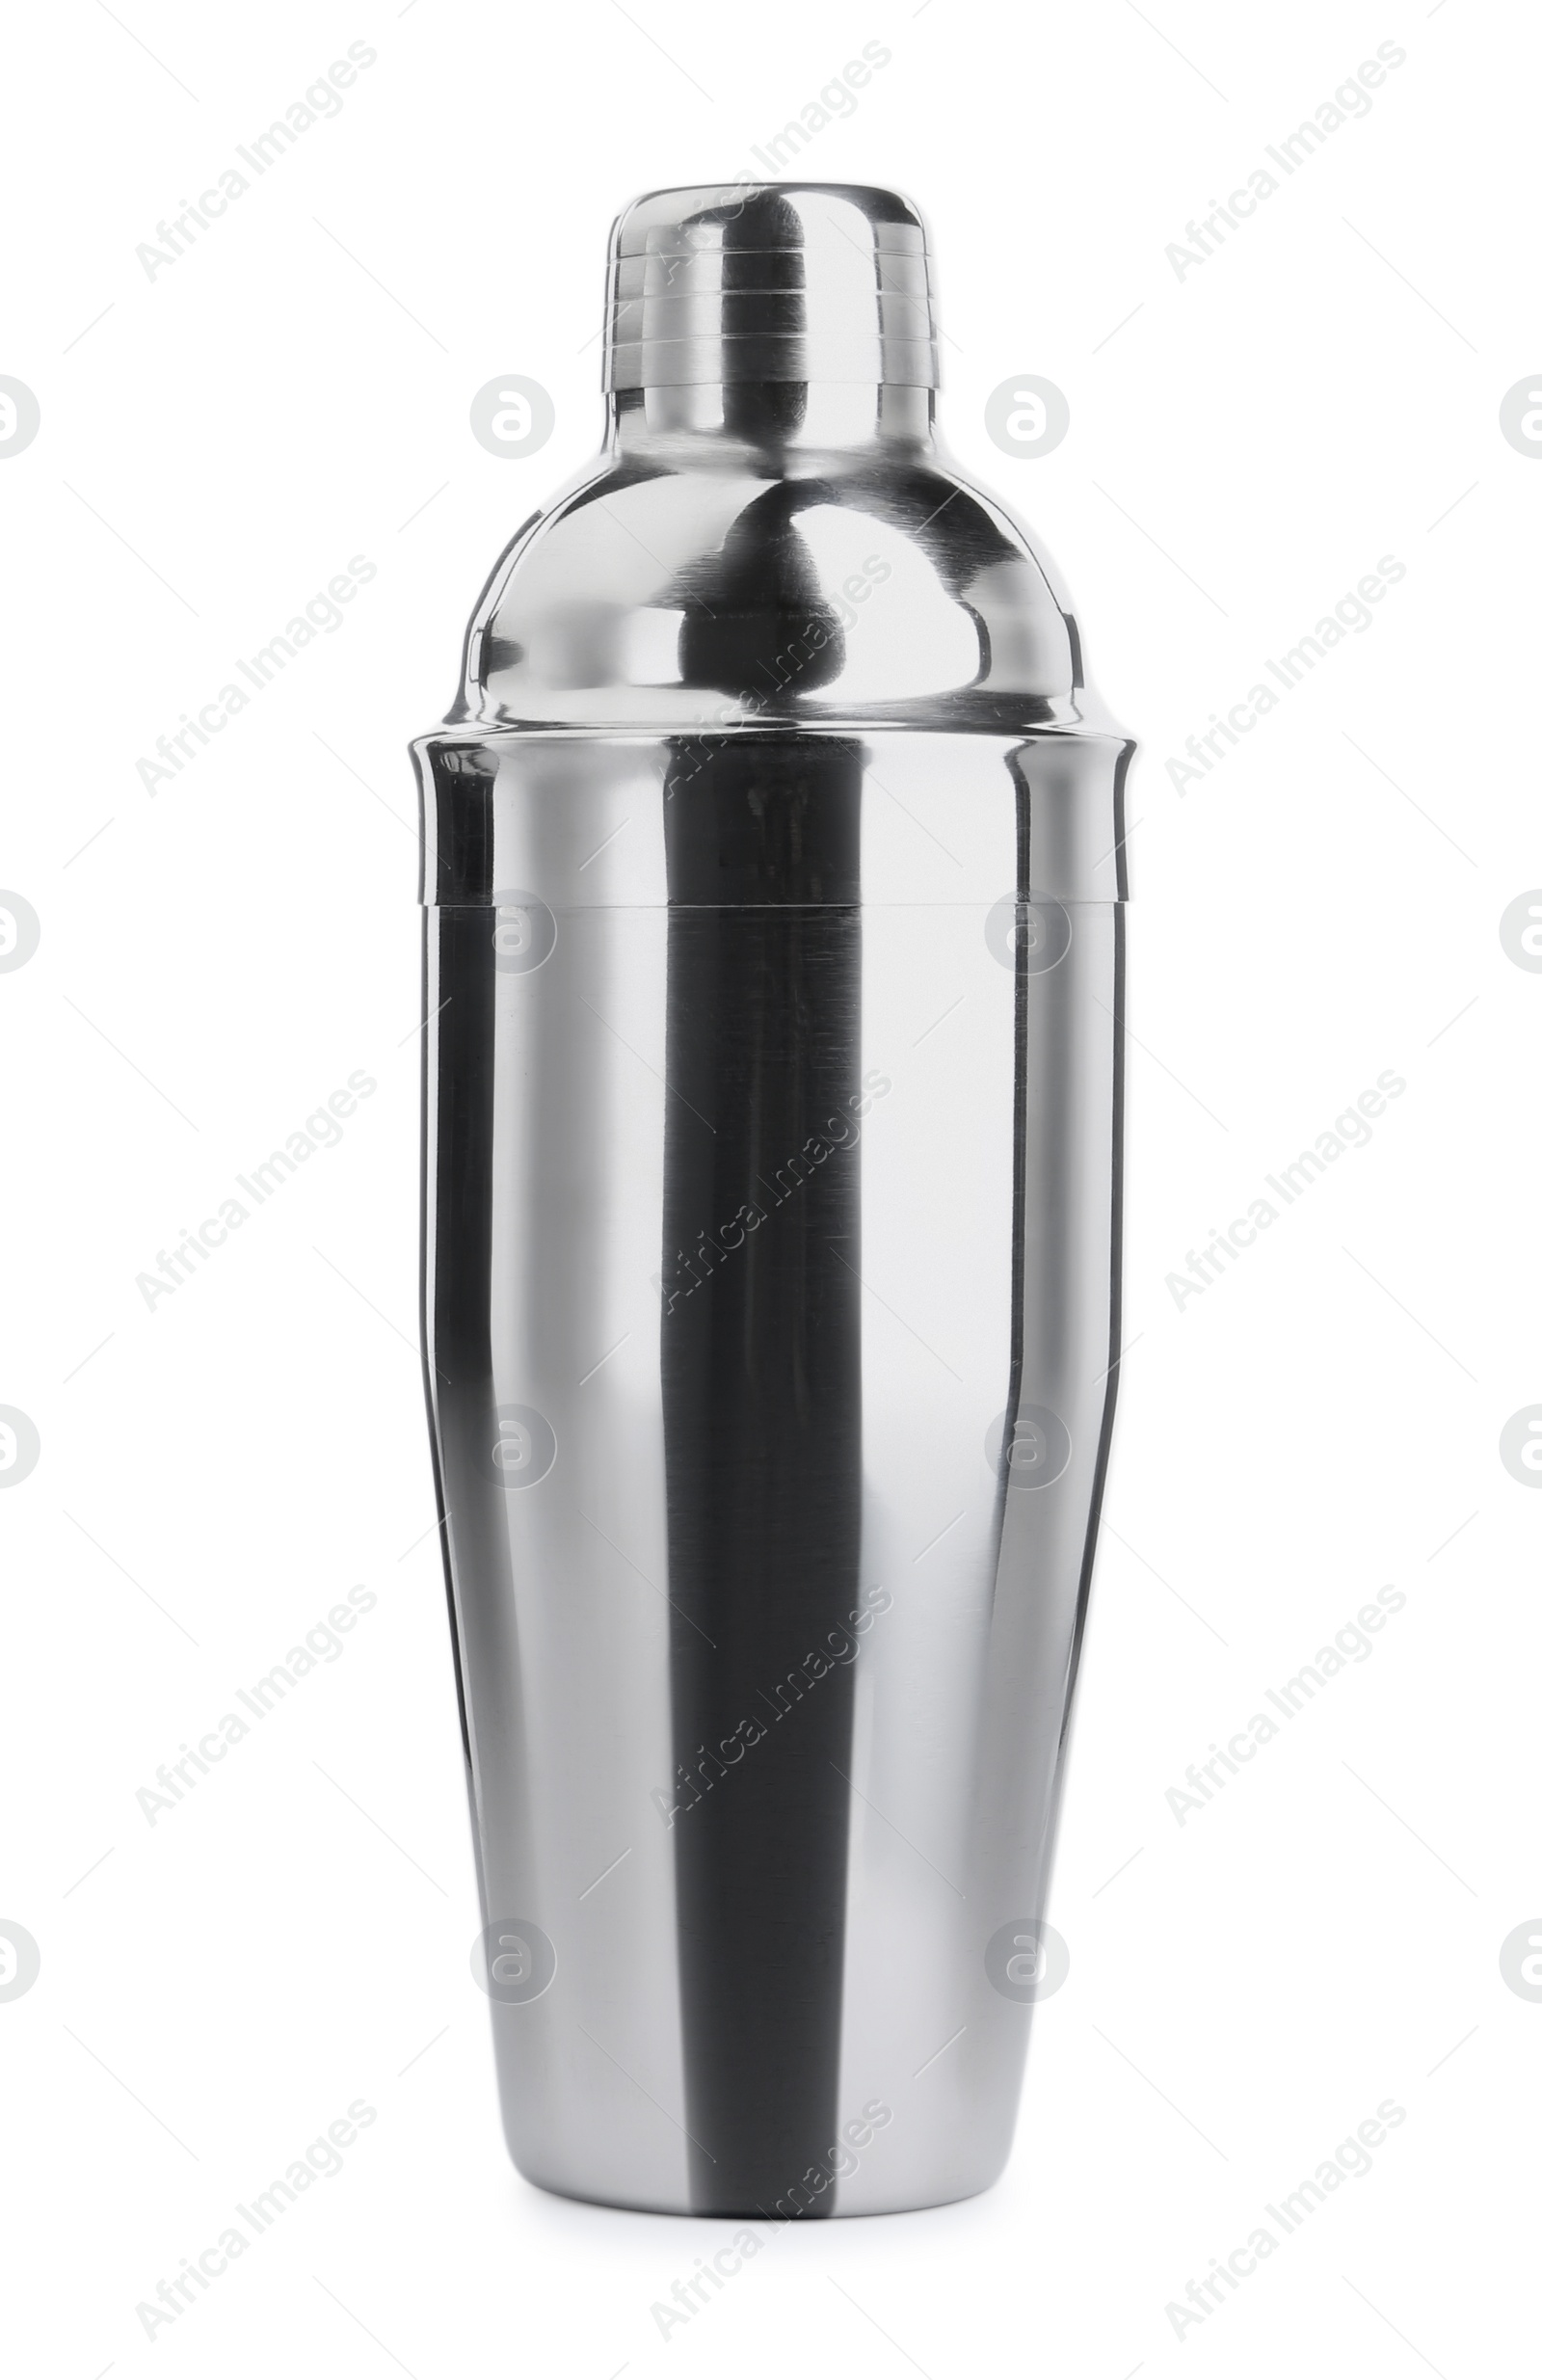 Photo of One metal cocktail shaker isolated on white